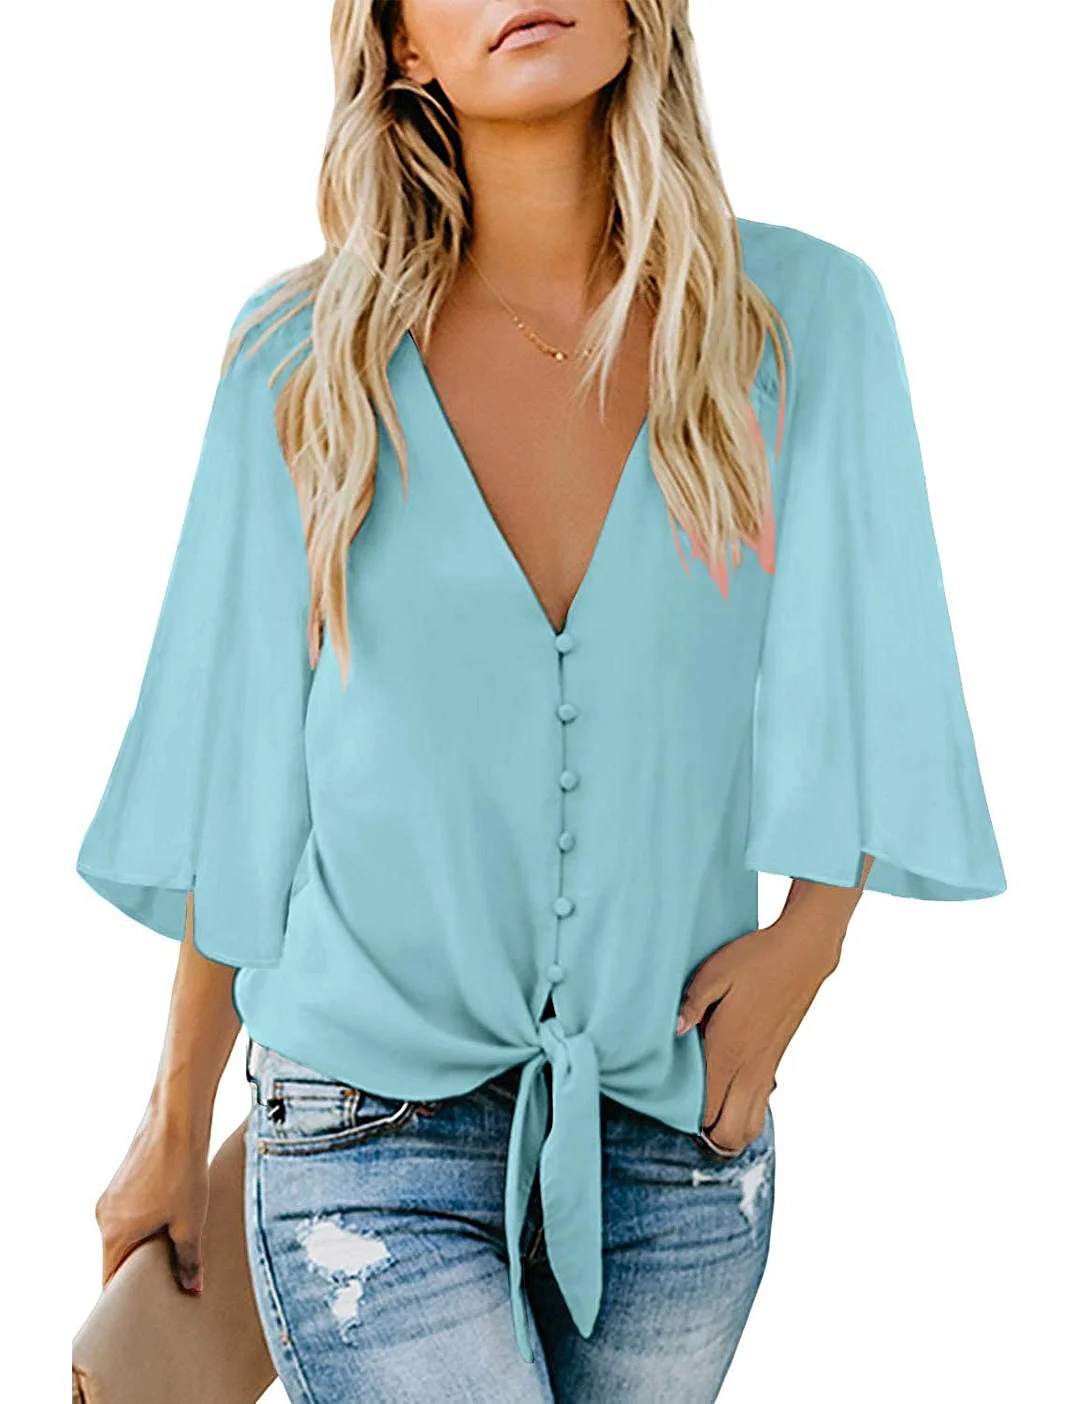 Blouses Shirt Women's Casual 3/4 Tiered Bell Sleeve Crewneck Loose Tops Blouses Shirt